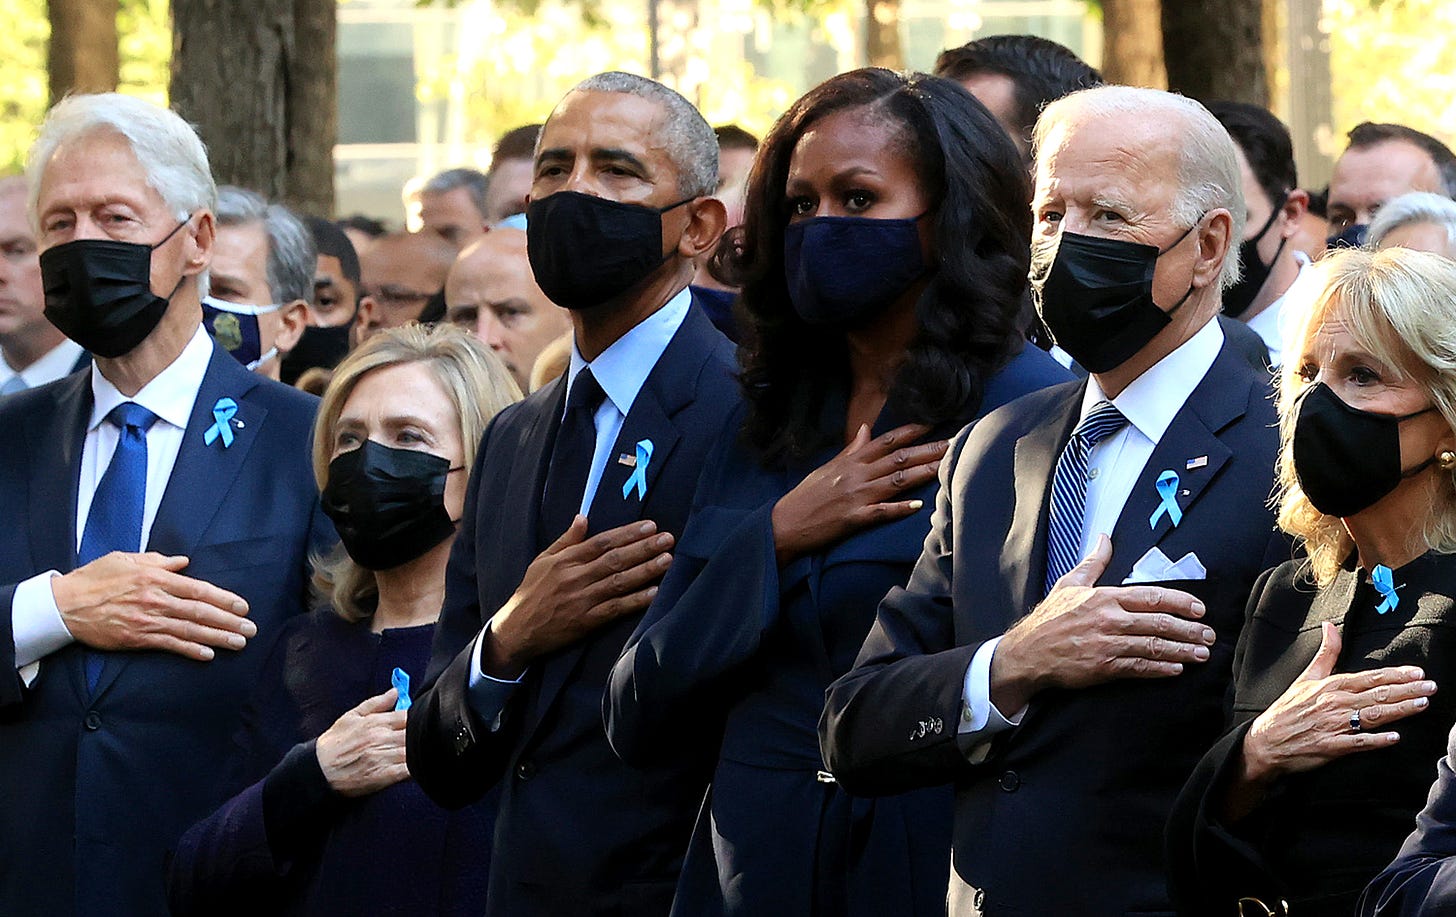 Bidens, Obamas, & Clintons Attend 9/11 Commemoration Ceremony on 20th ...